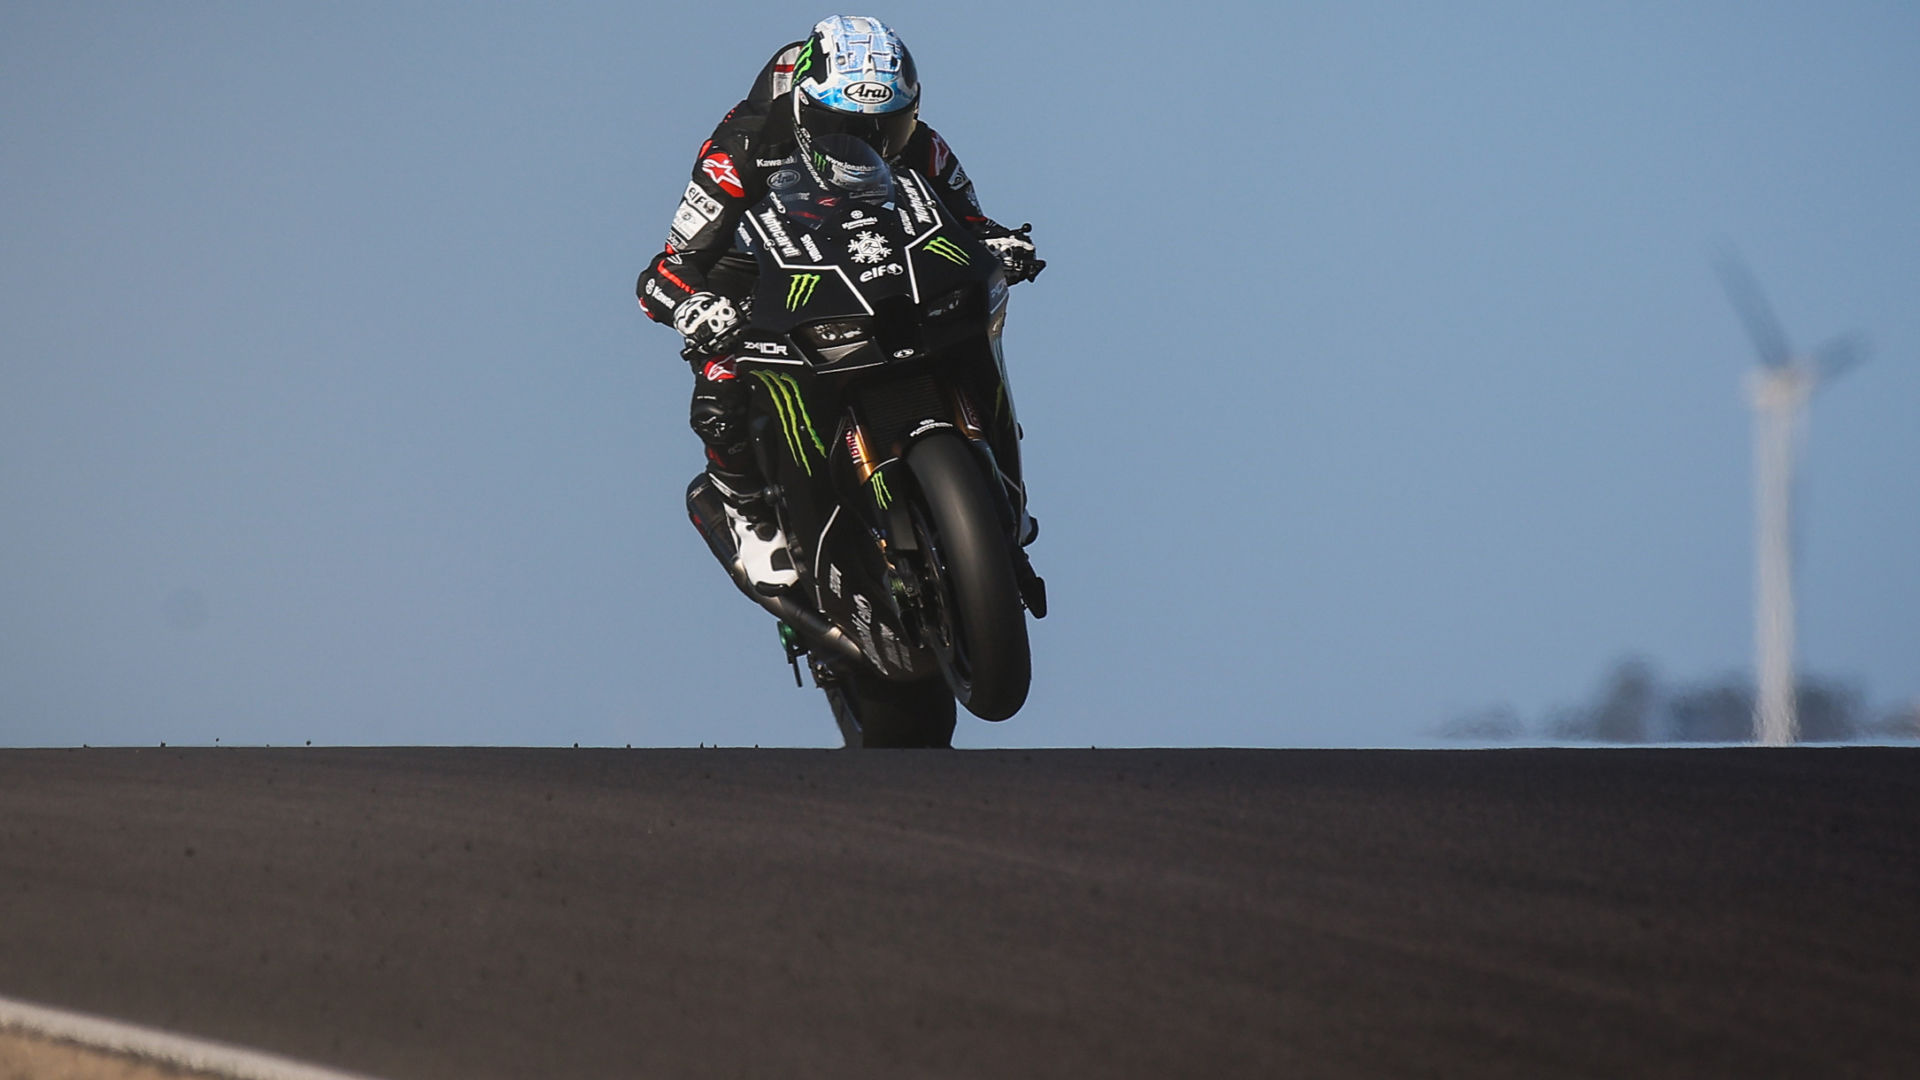 Jonathan Rea was quickest on Day One of WorldSBK testing in Portugal but not by much. Photo courtesy Dorna.